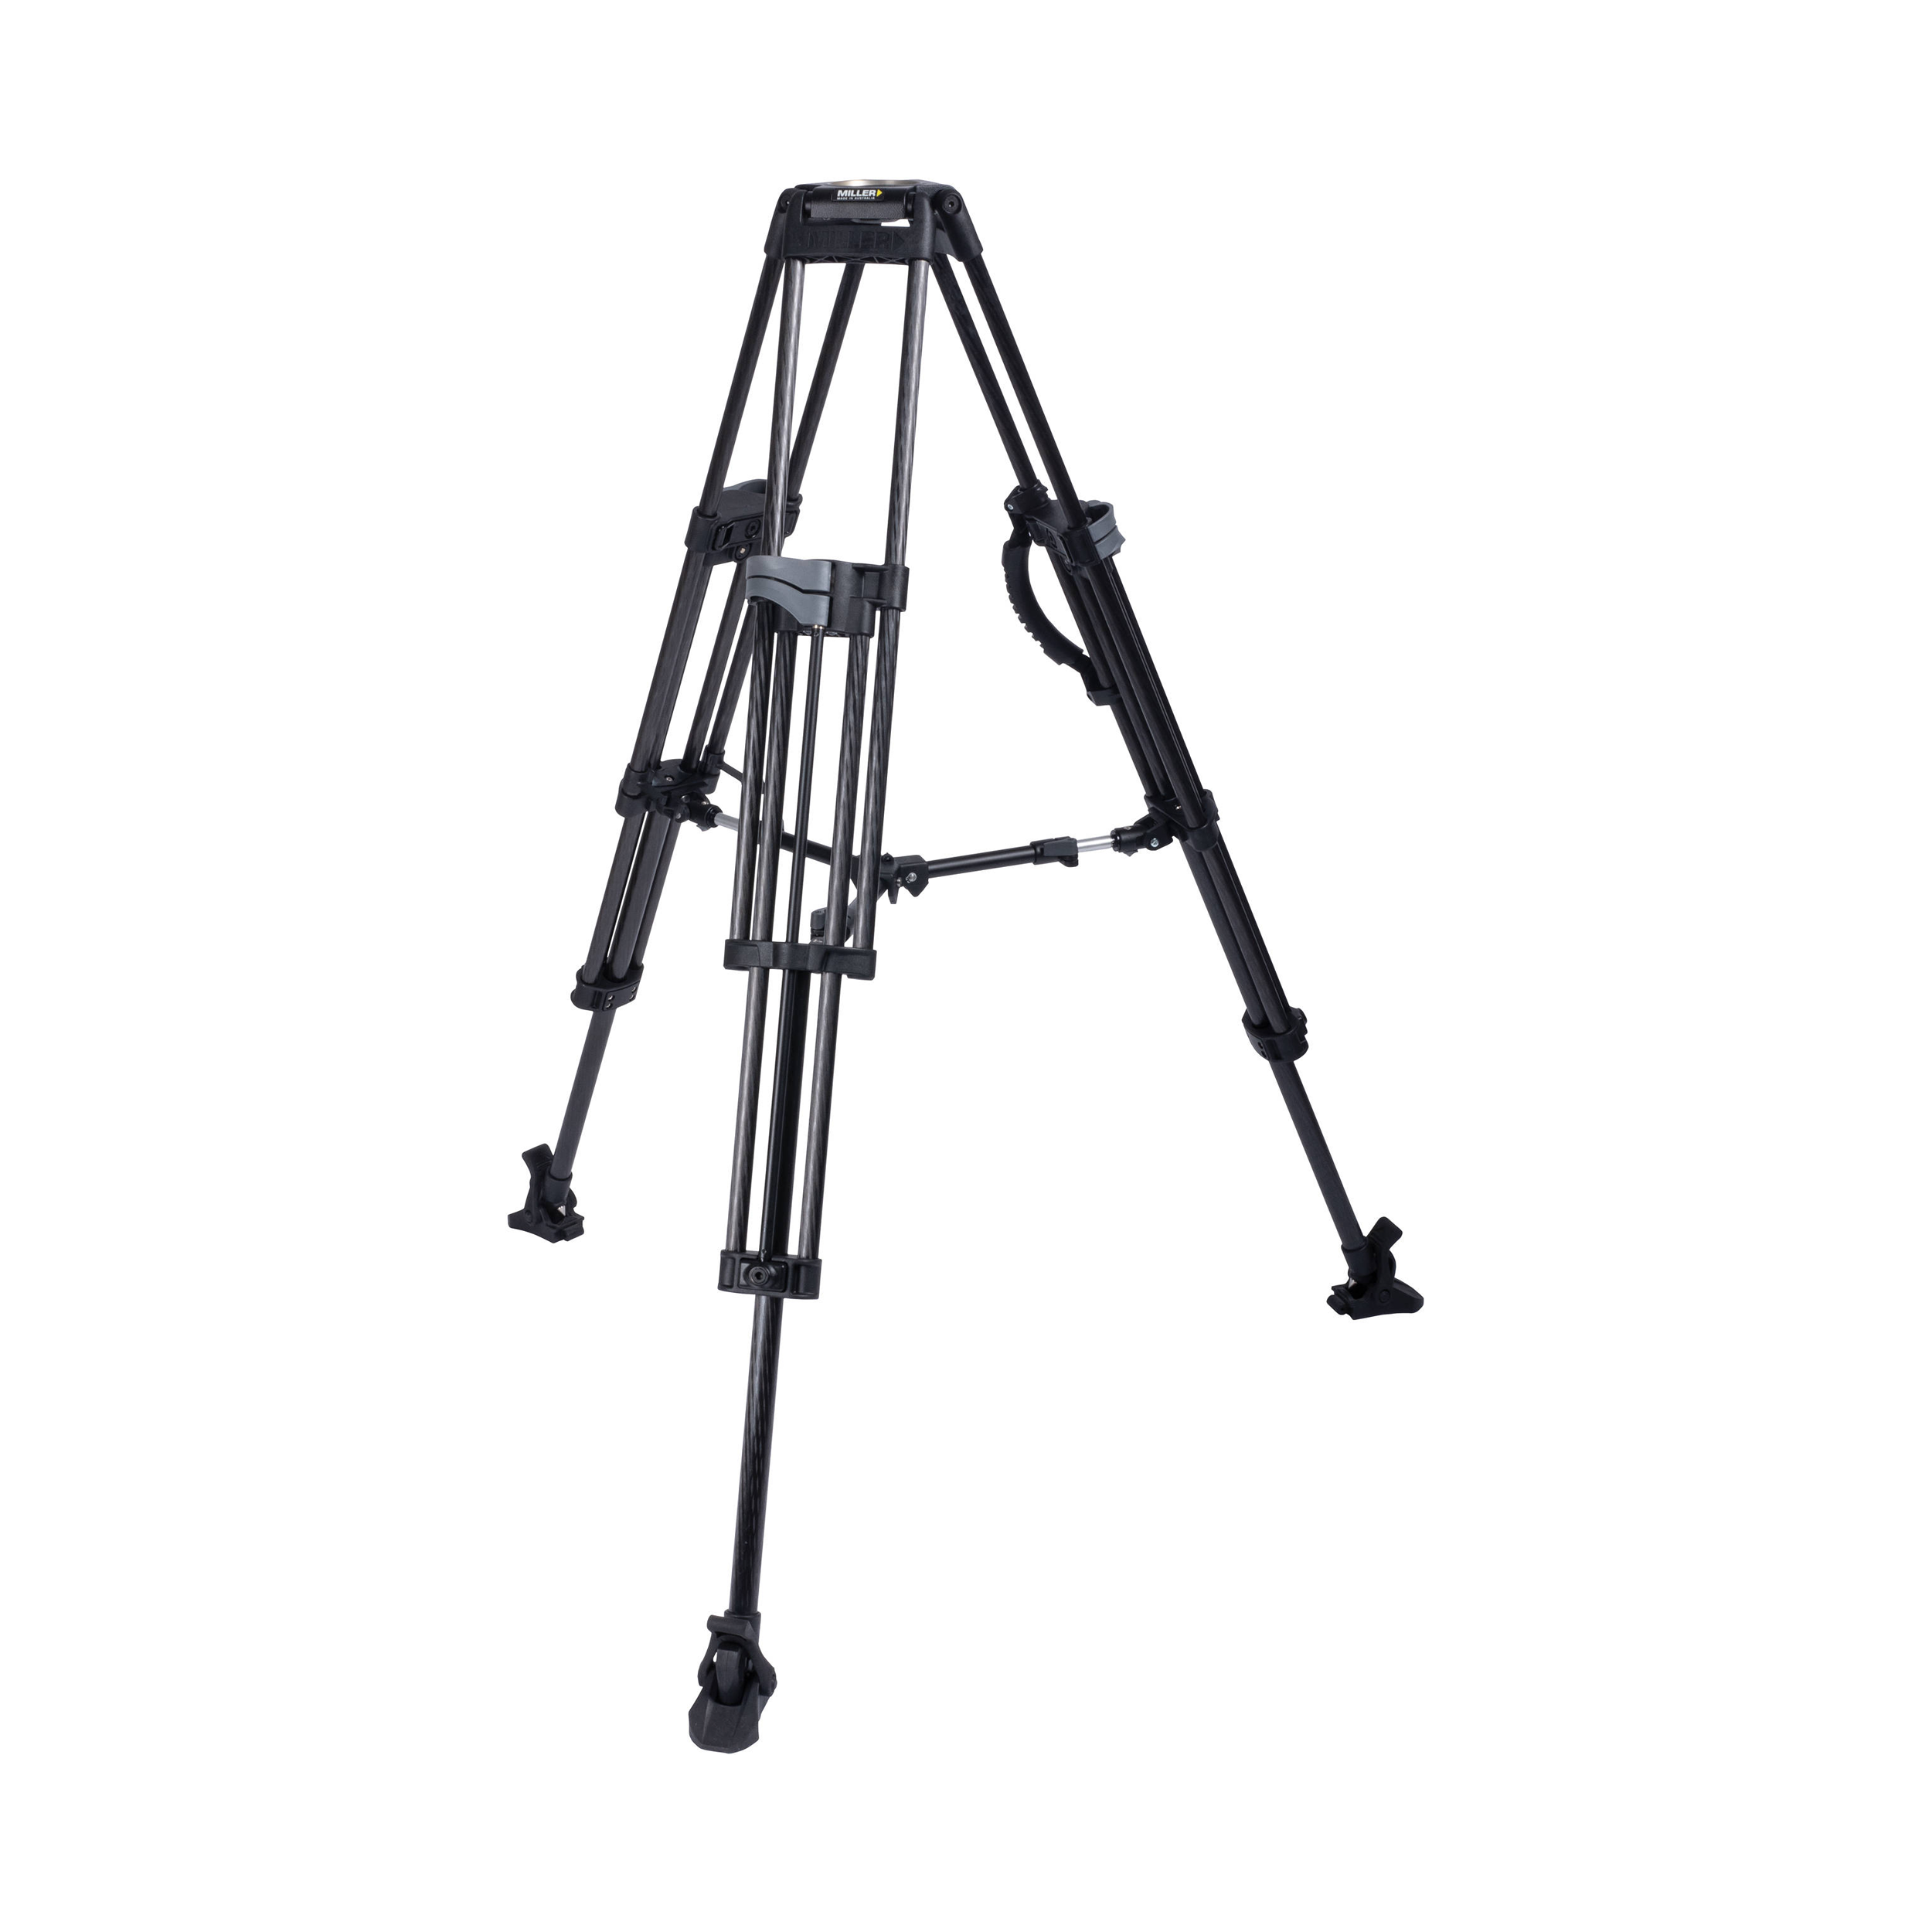 MILLER 75 Sprinter II 2-St Carbon Fiber Tripod to suit Mid-Level Spreader (593) and Feet (475)